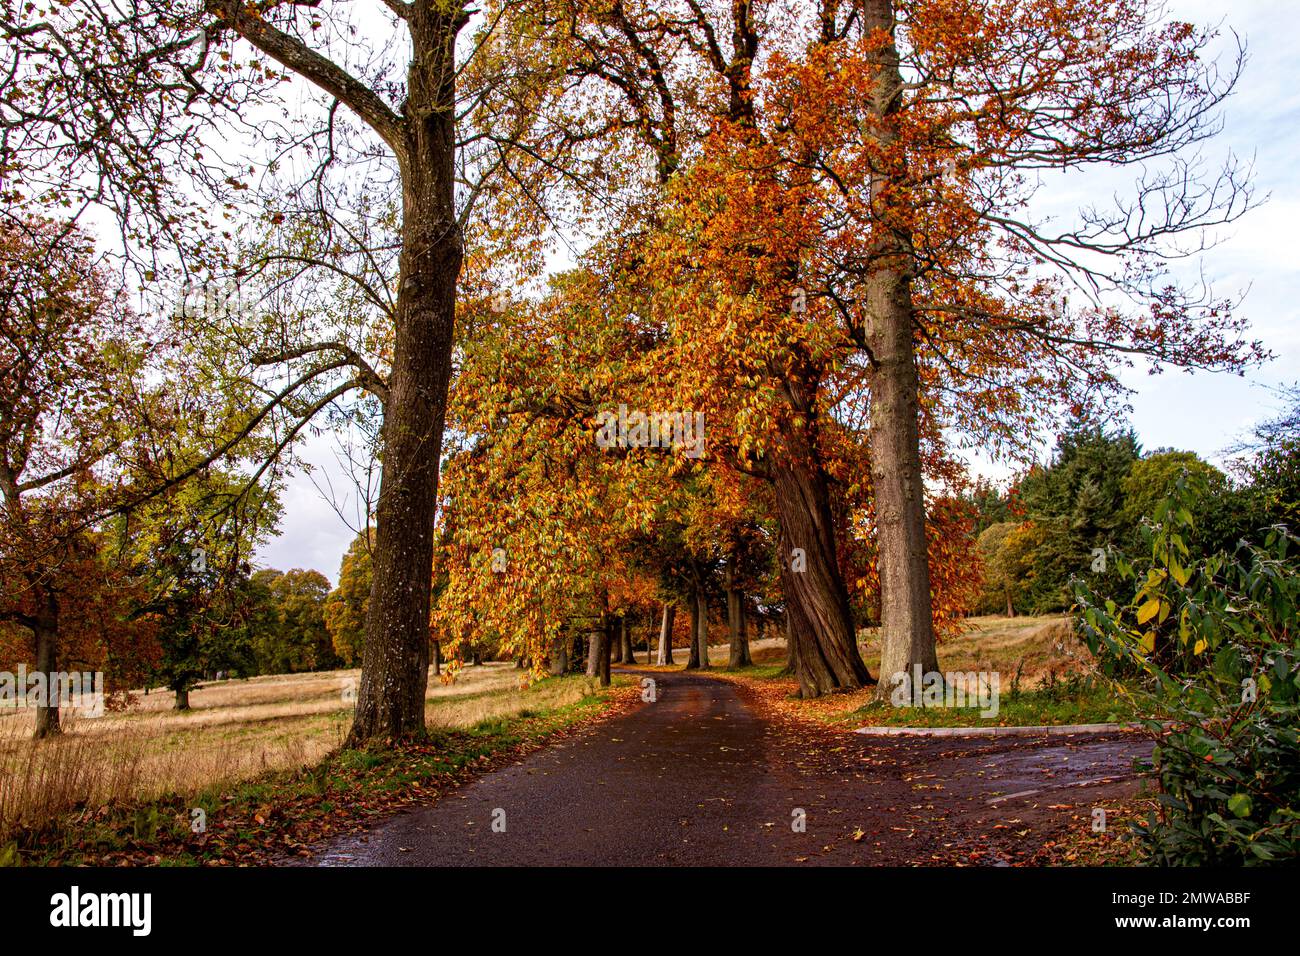 Beautiful and colourful autumn scenery at Dundee's Camperdown Country Park in Scotland, UK Stock Photo